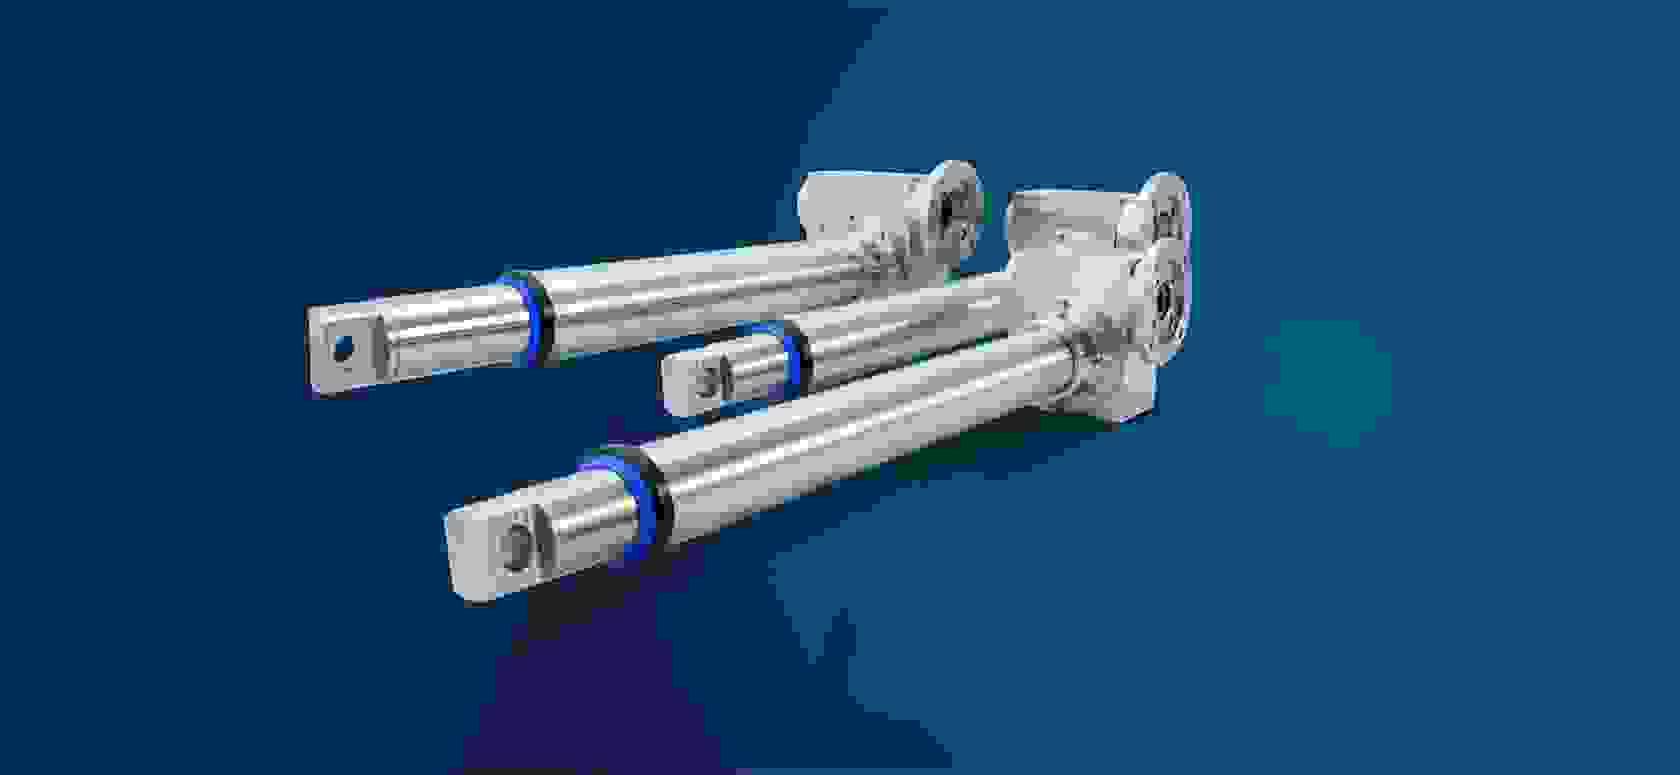 Actuator in stainless steel on blue background